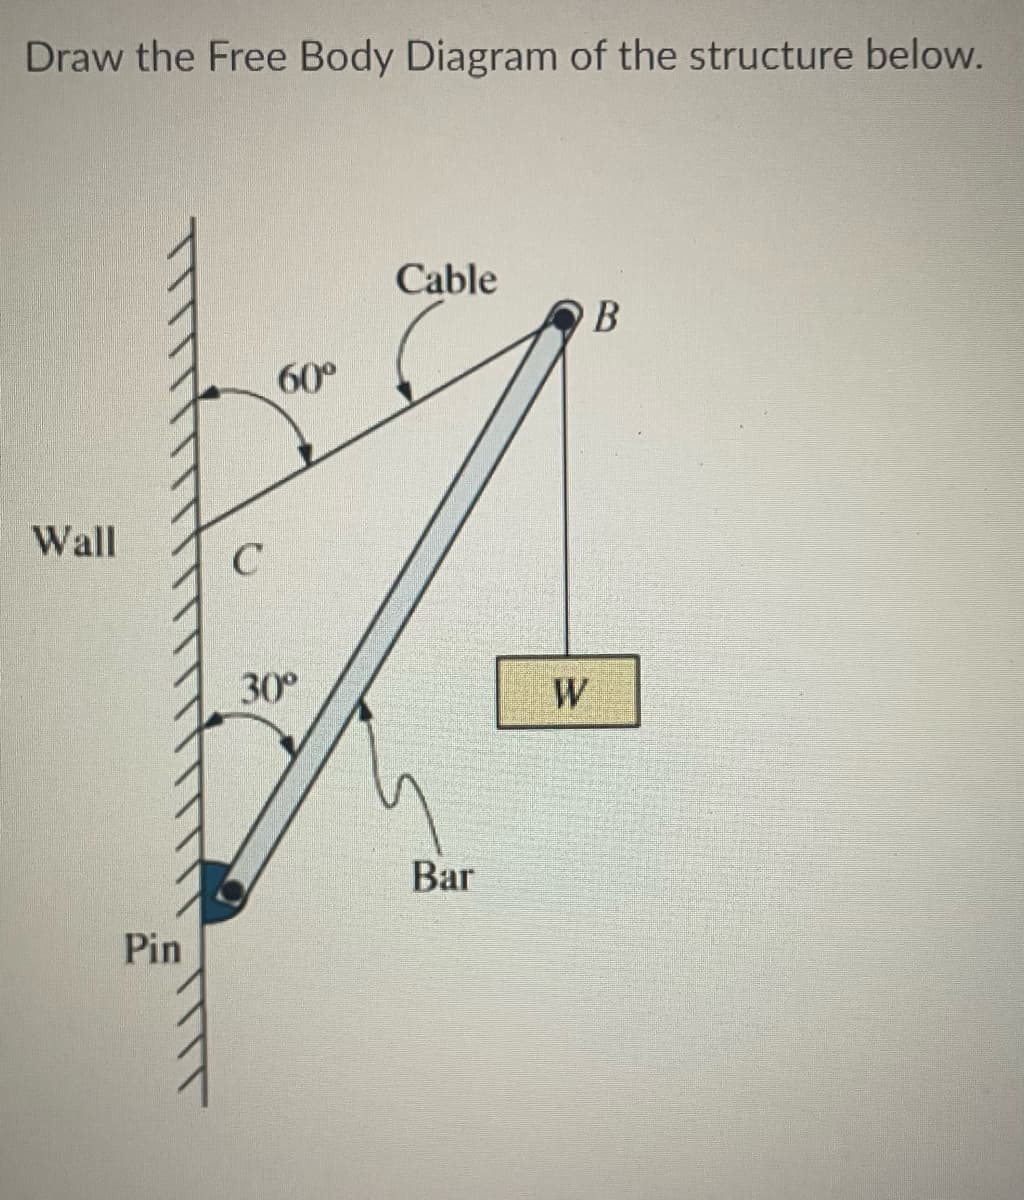 Draw the Free Body Diagram of the structure below.
Wall
Pin
C
60°
30°
Cable
Bar
W
B